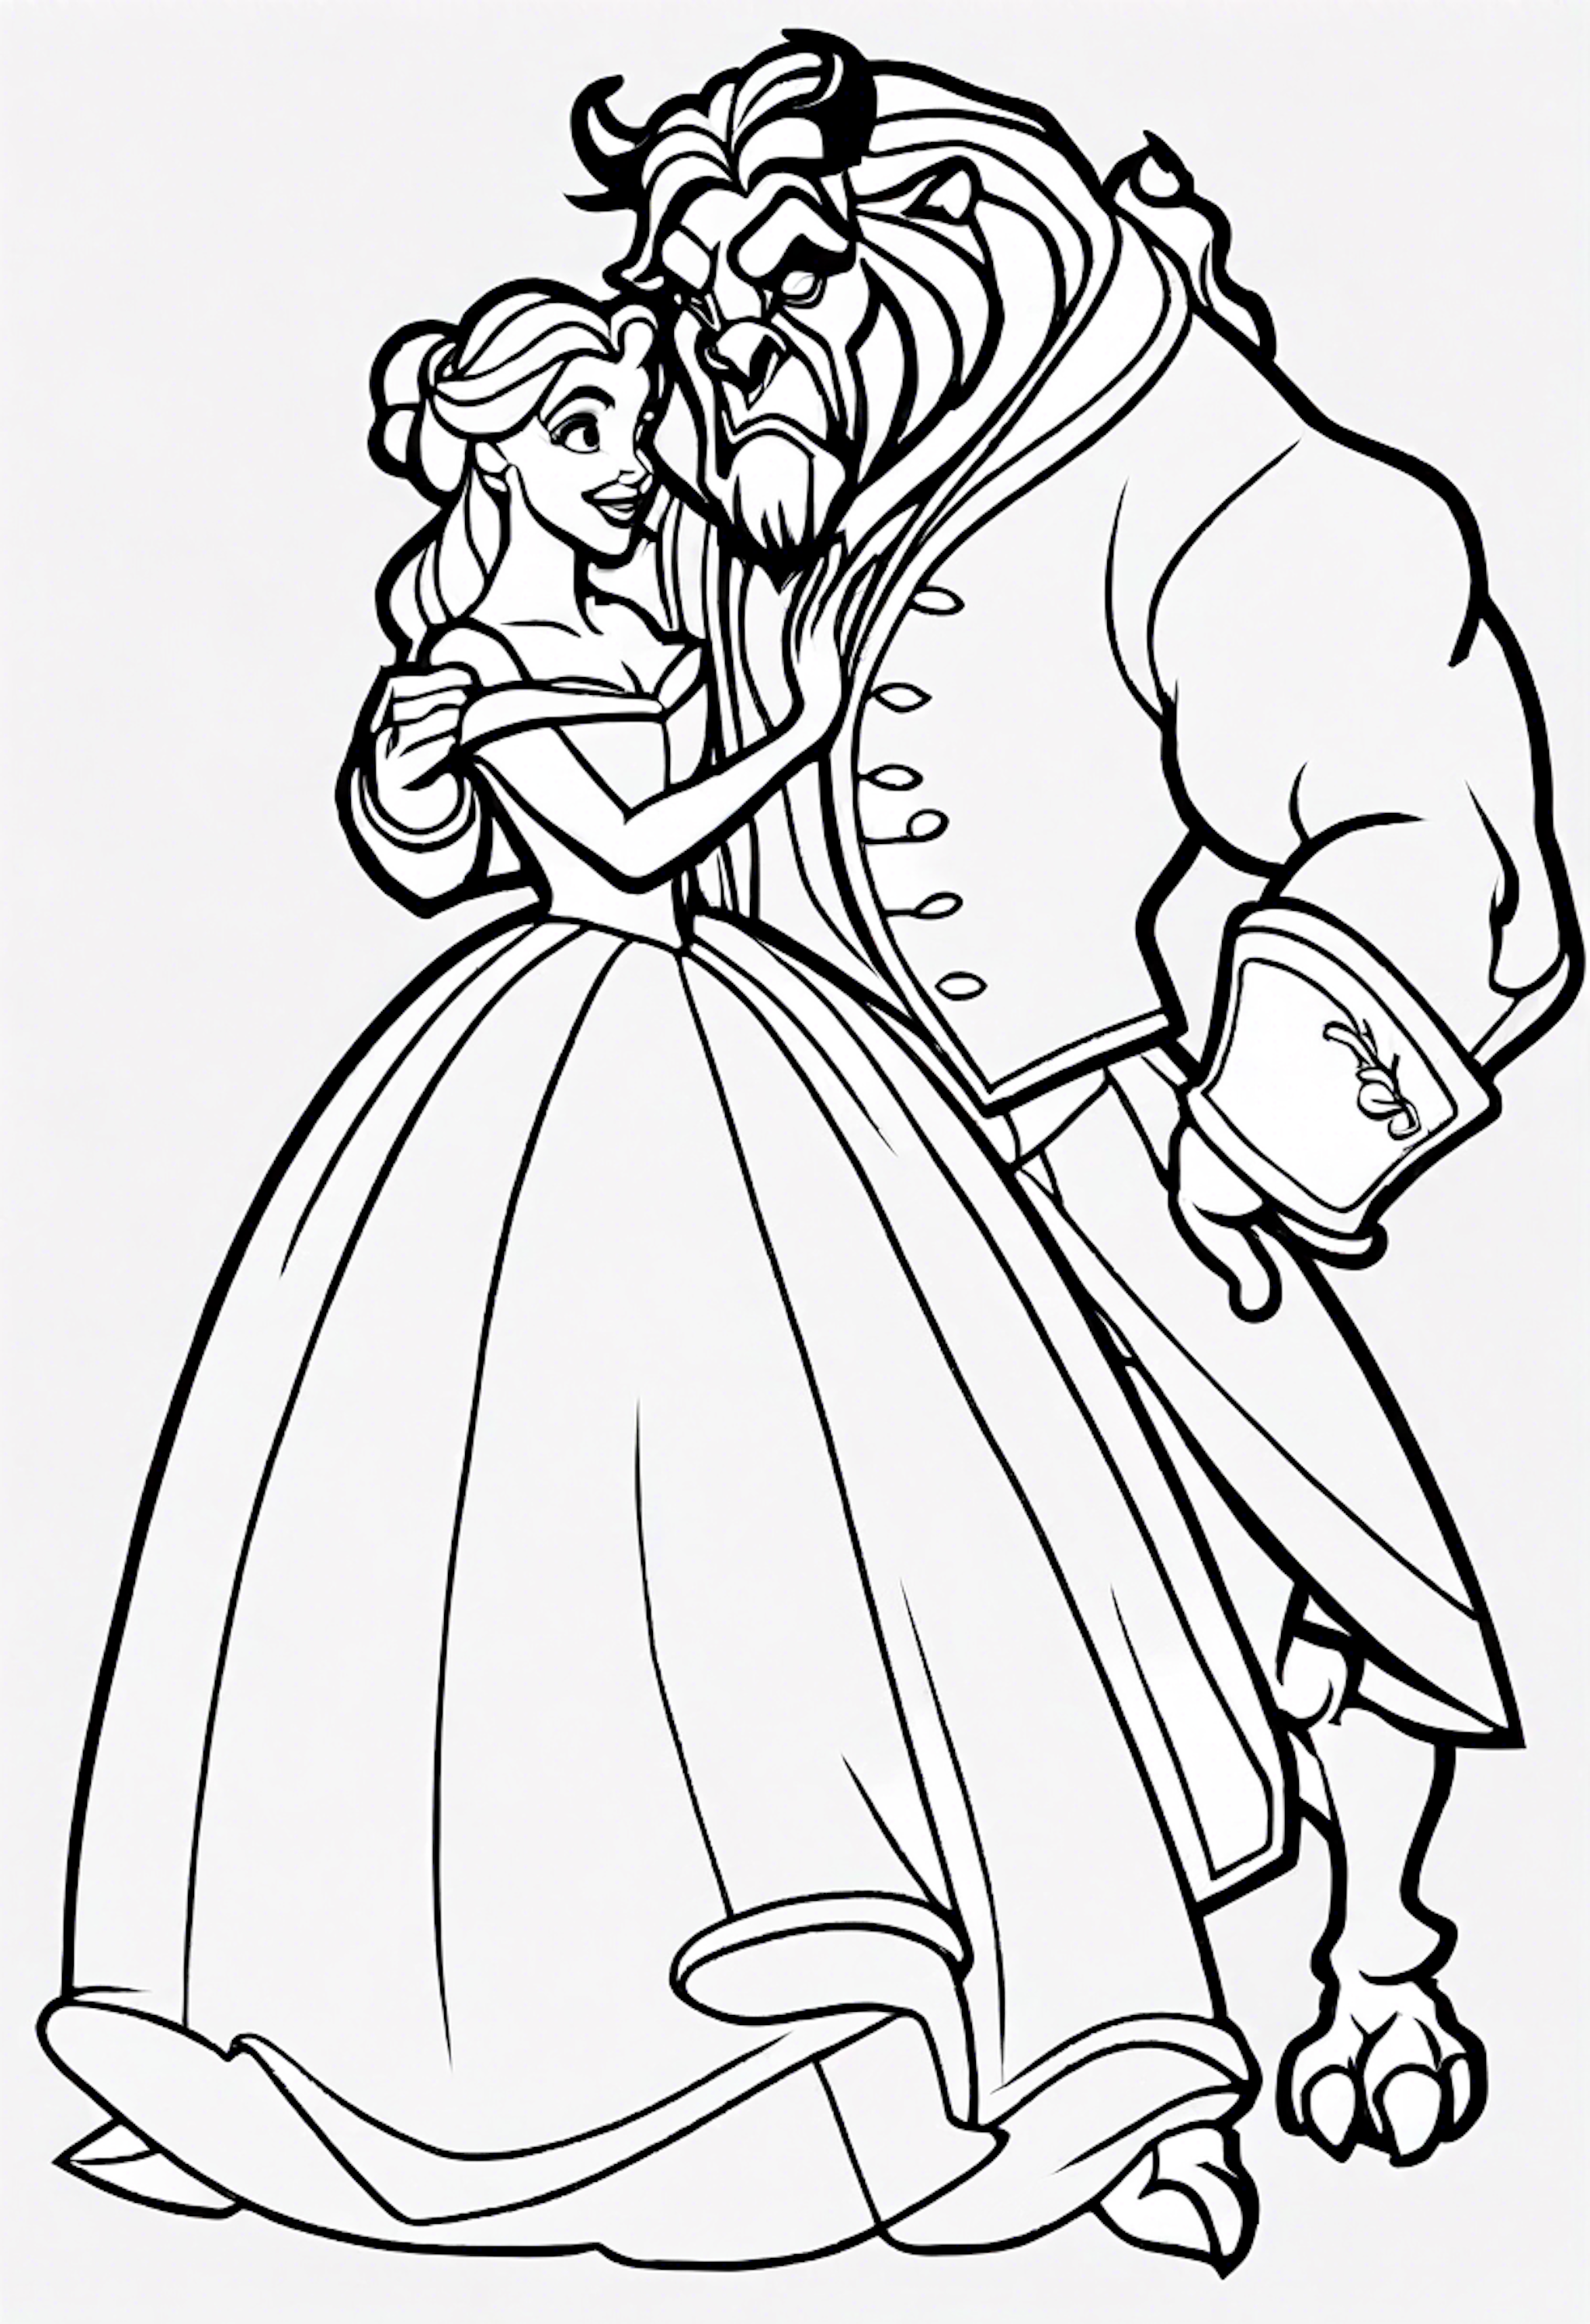 A coloring page for 1 Beauty And The Beast coloring pages